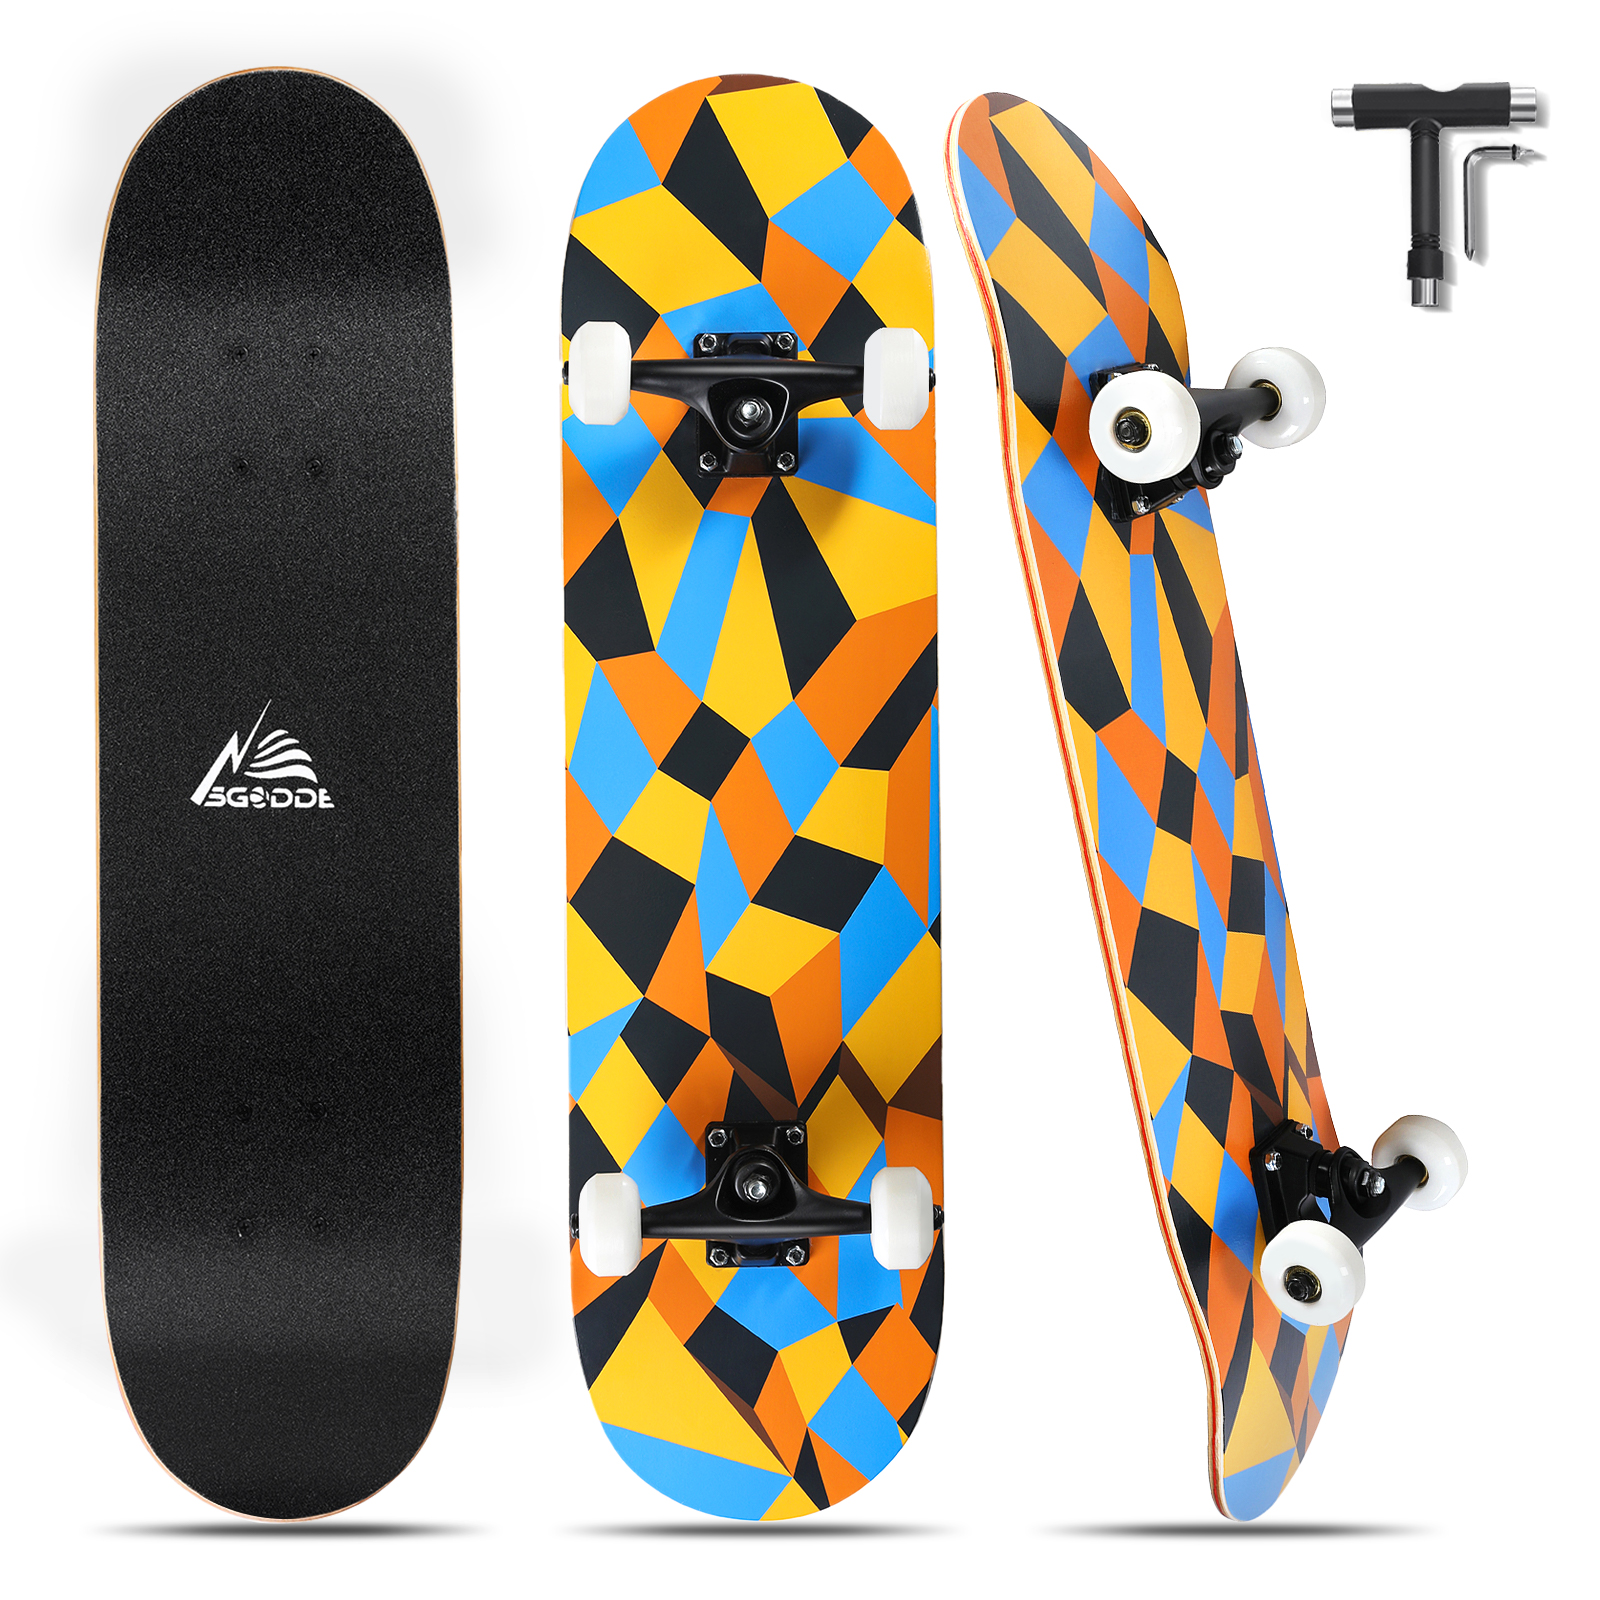 Find 31 Kids Skateboard 7 Layer Maple Long boards for Children Boys Girls Youths Beginners for Sale on Gipsybee.com with cryptocurrencies